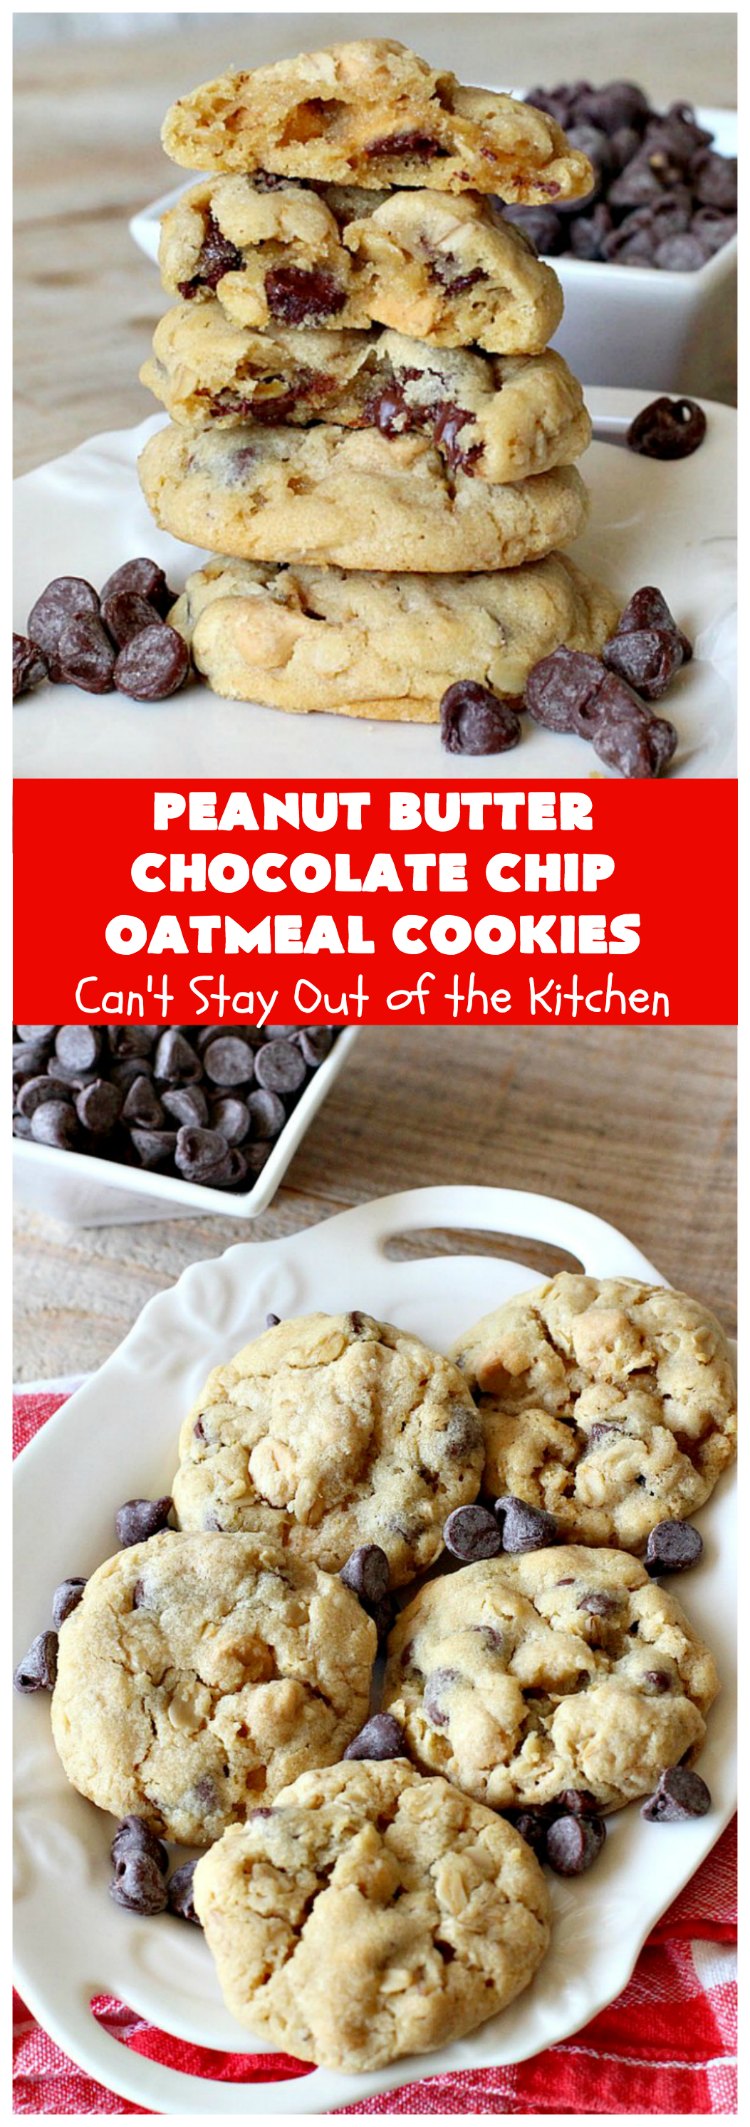 Peanut Butter Chocolate Chip Oatmeal Cookies | Can't Stay Out of the Kitchen